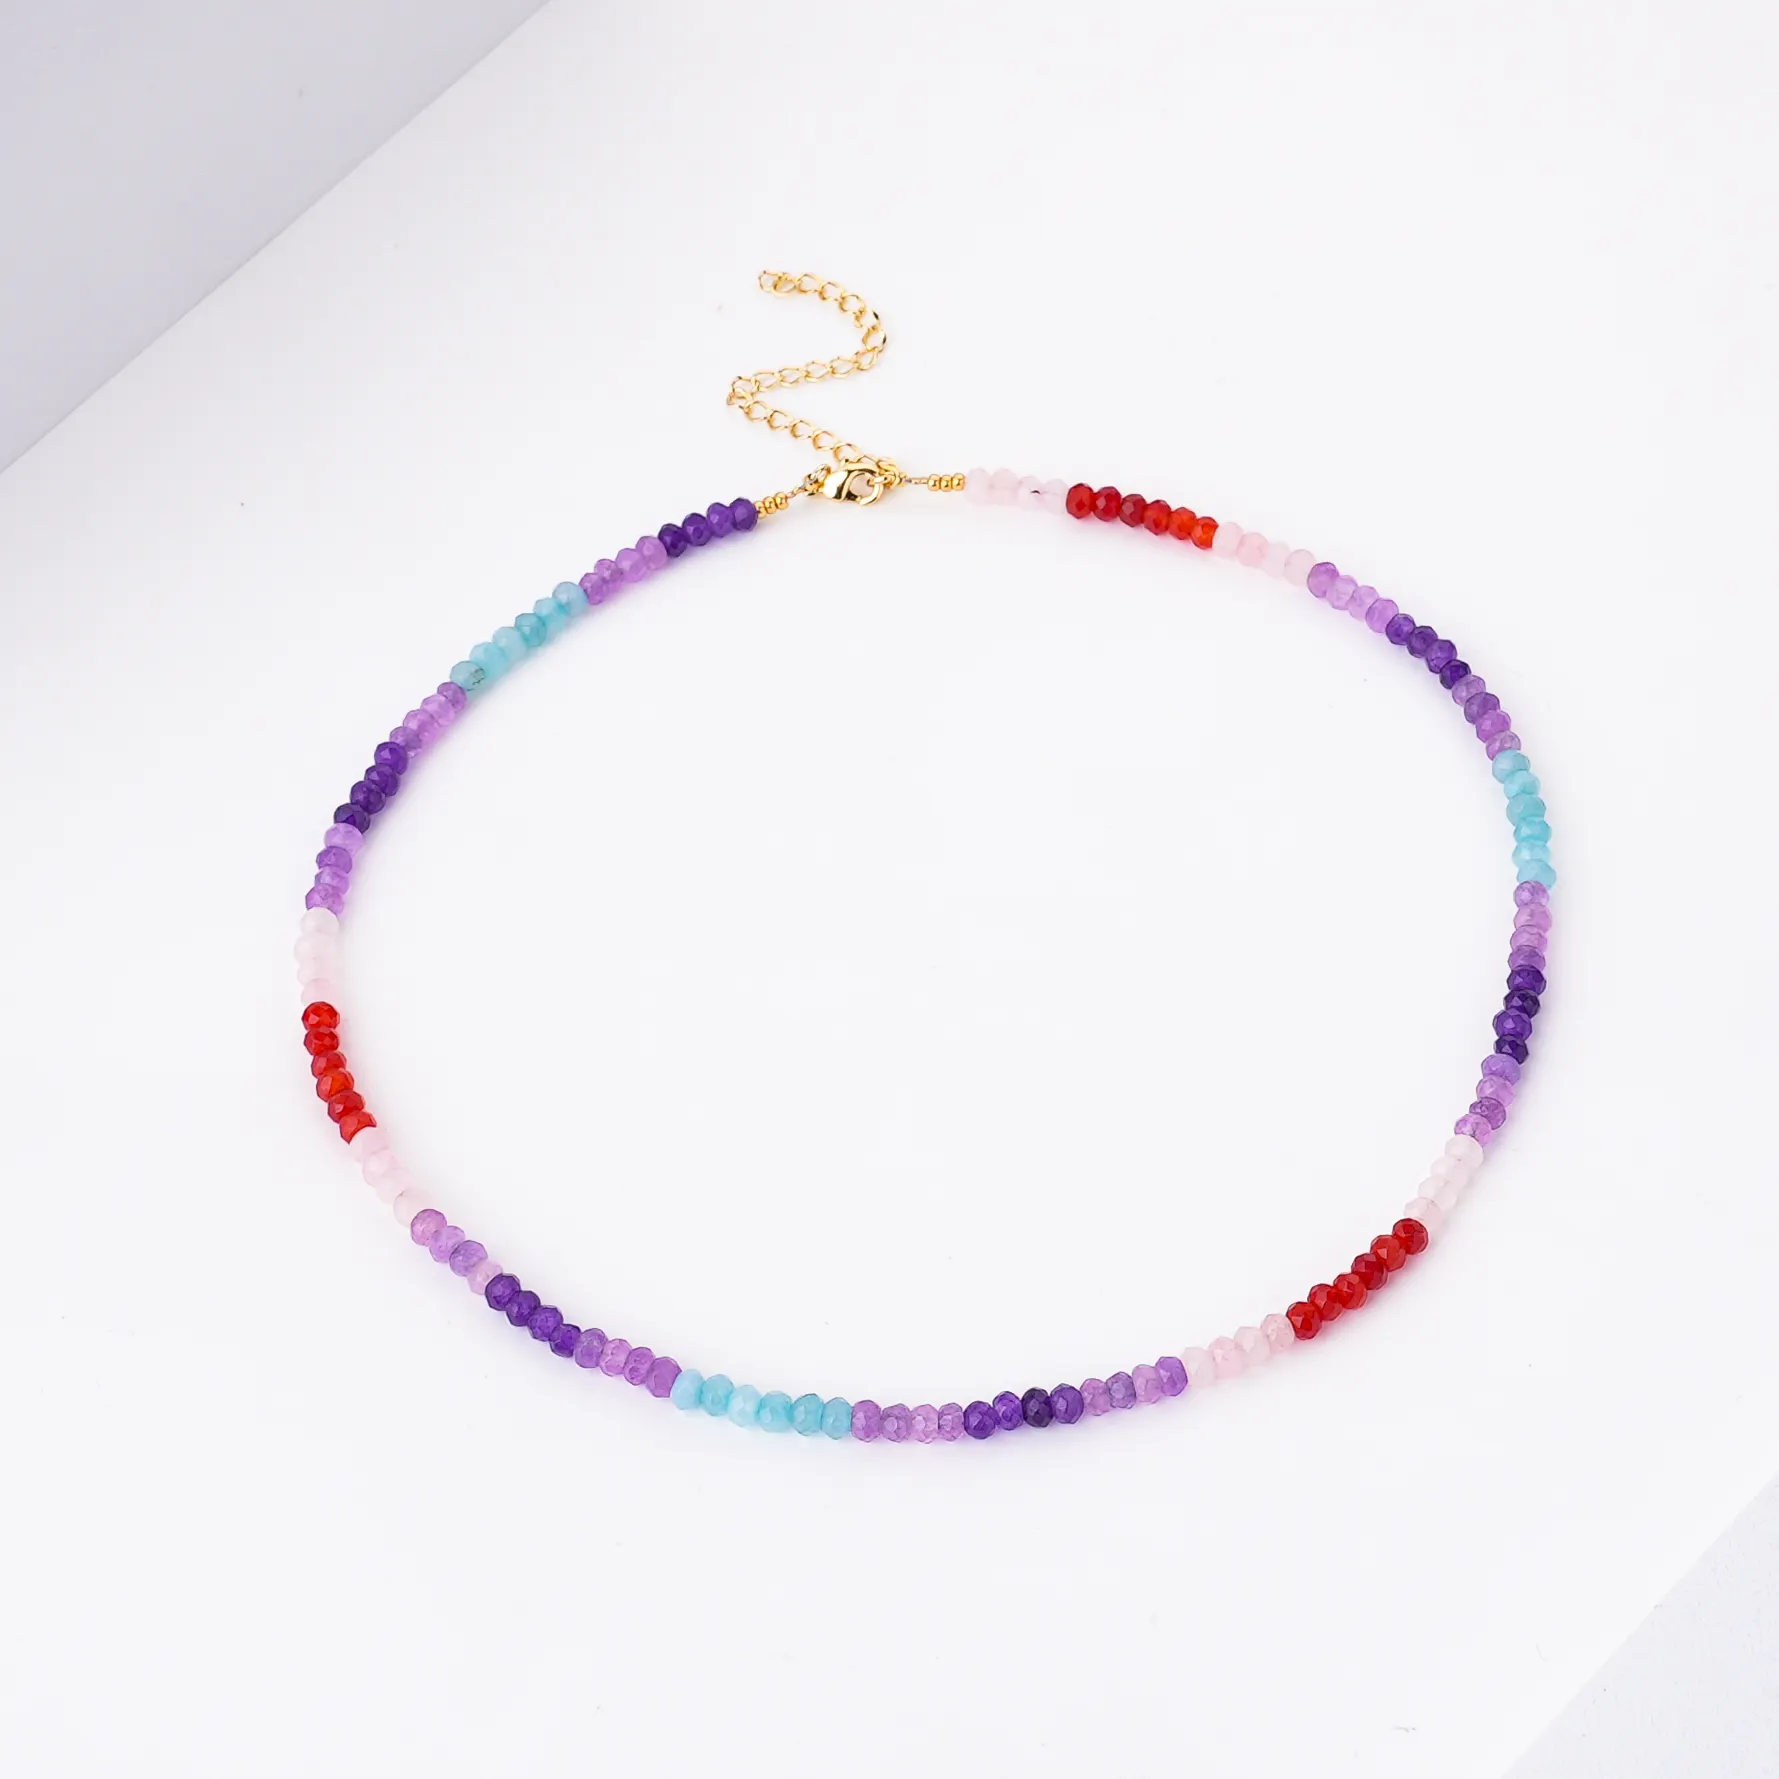 Tiny Natural Gemstone Purple 4MM Rondelle Beads Crystals Healing Stones Choker Necklace